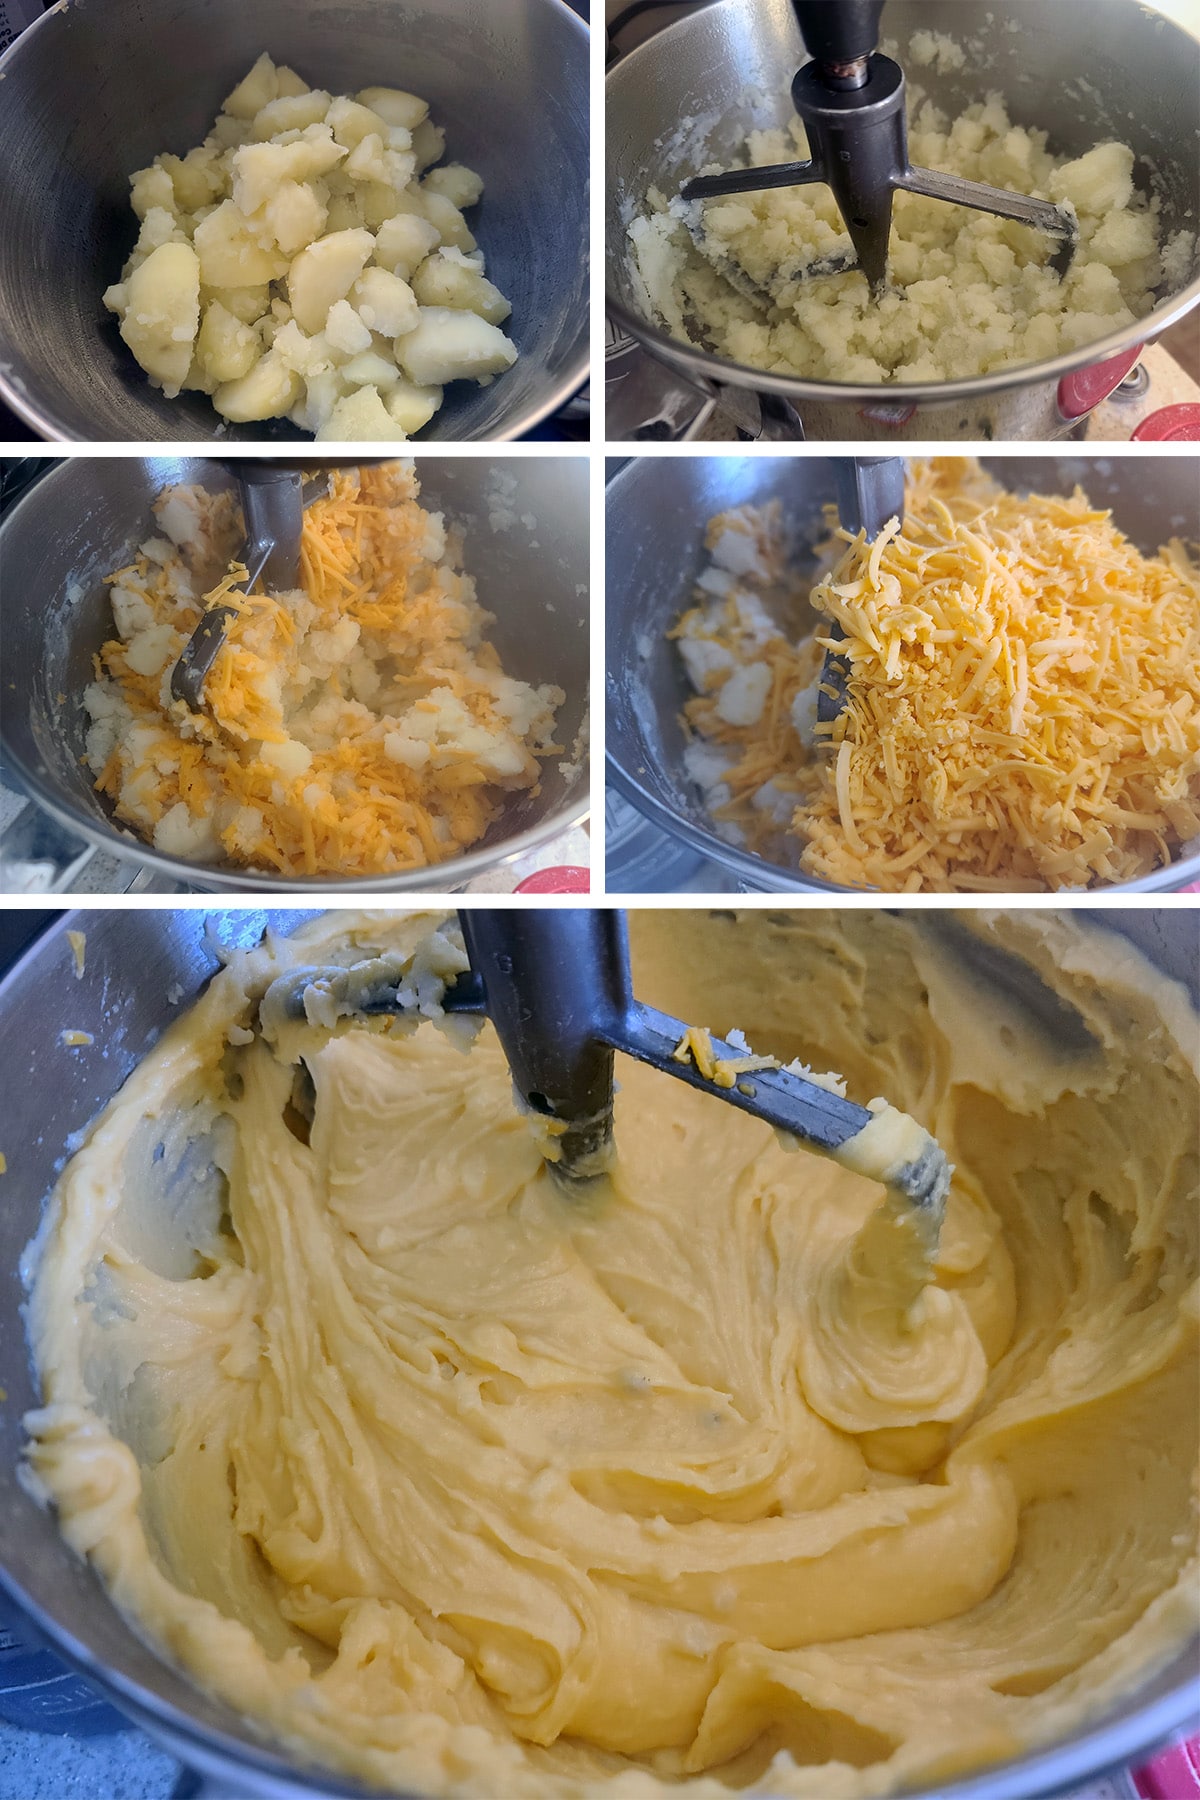 A 5 part image showing the potatoes being beaten with the cheese to form the filling.